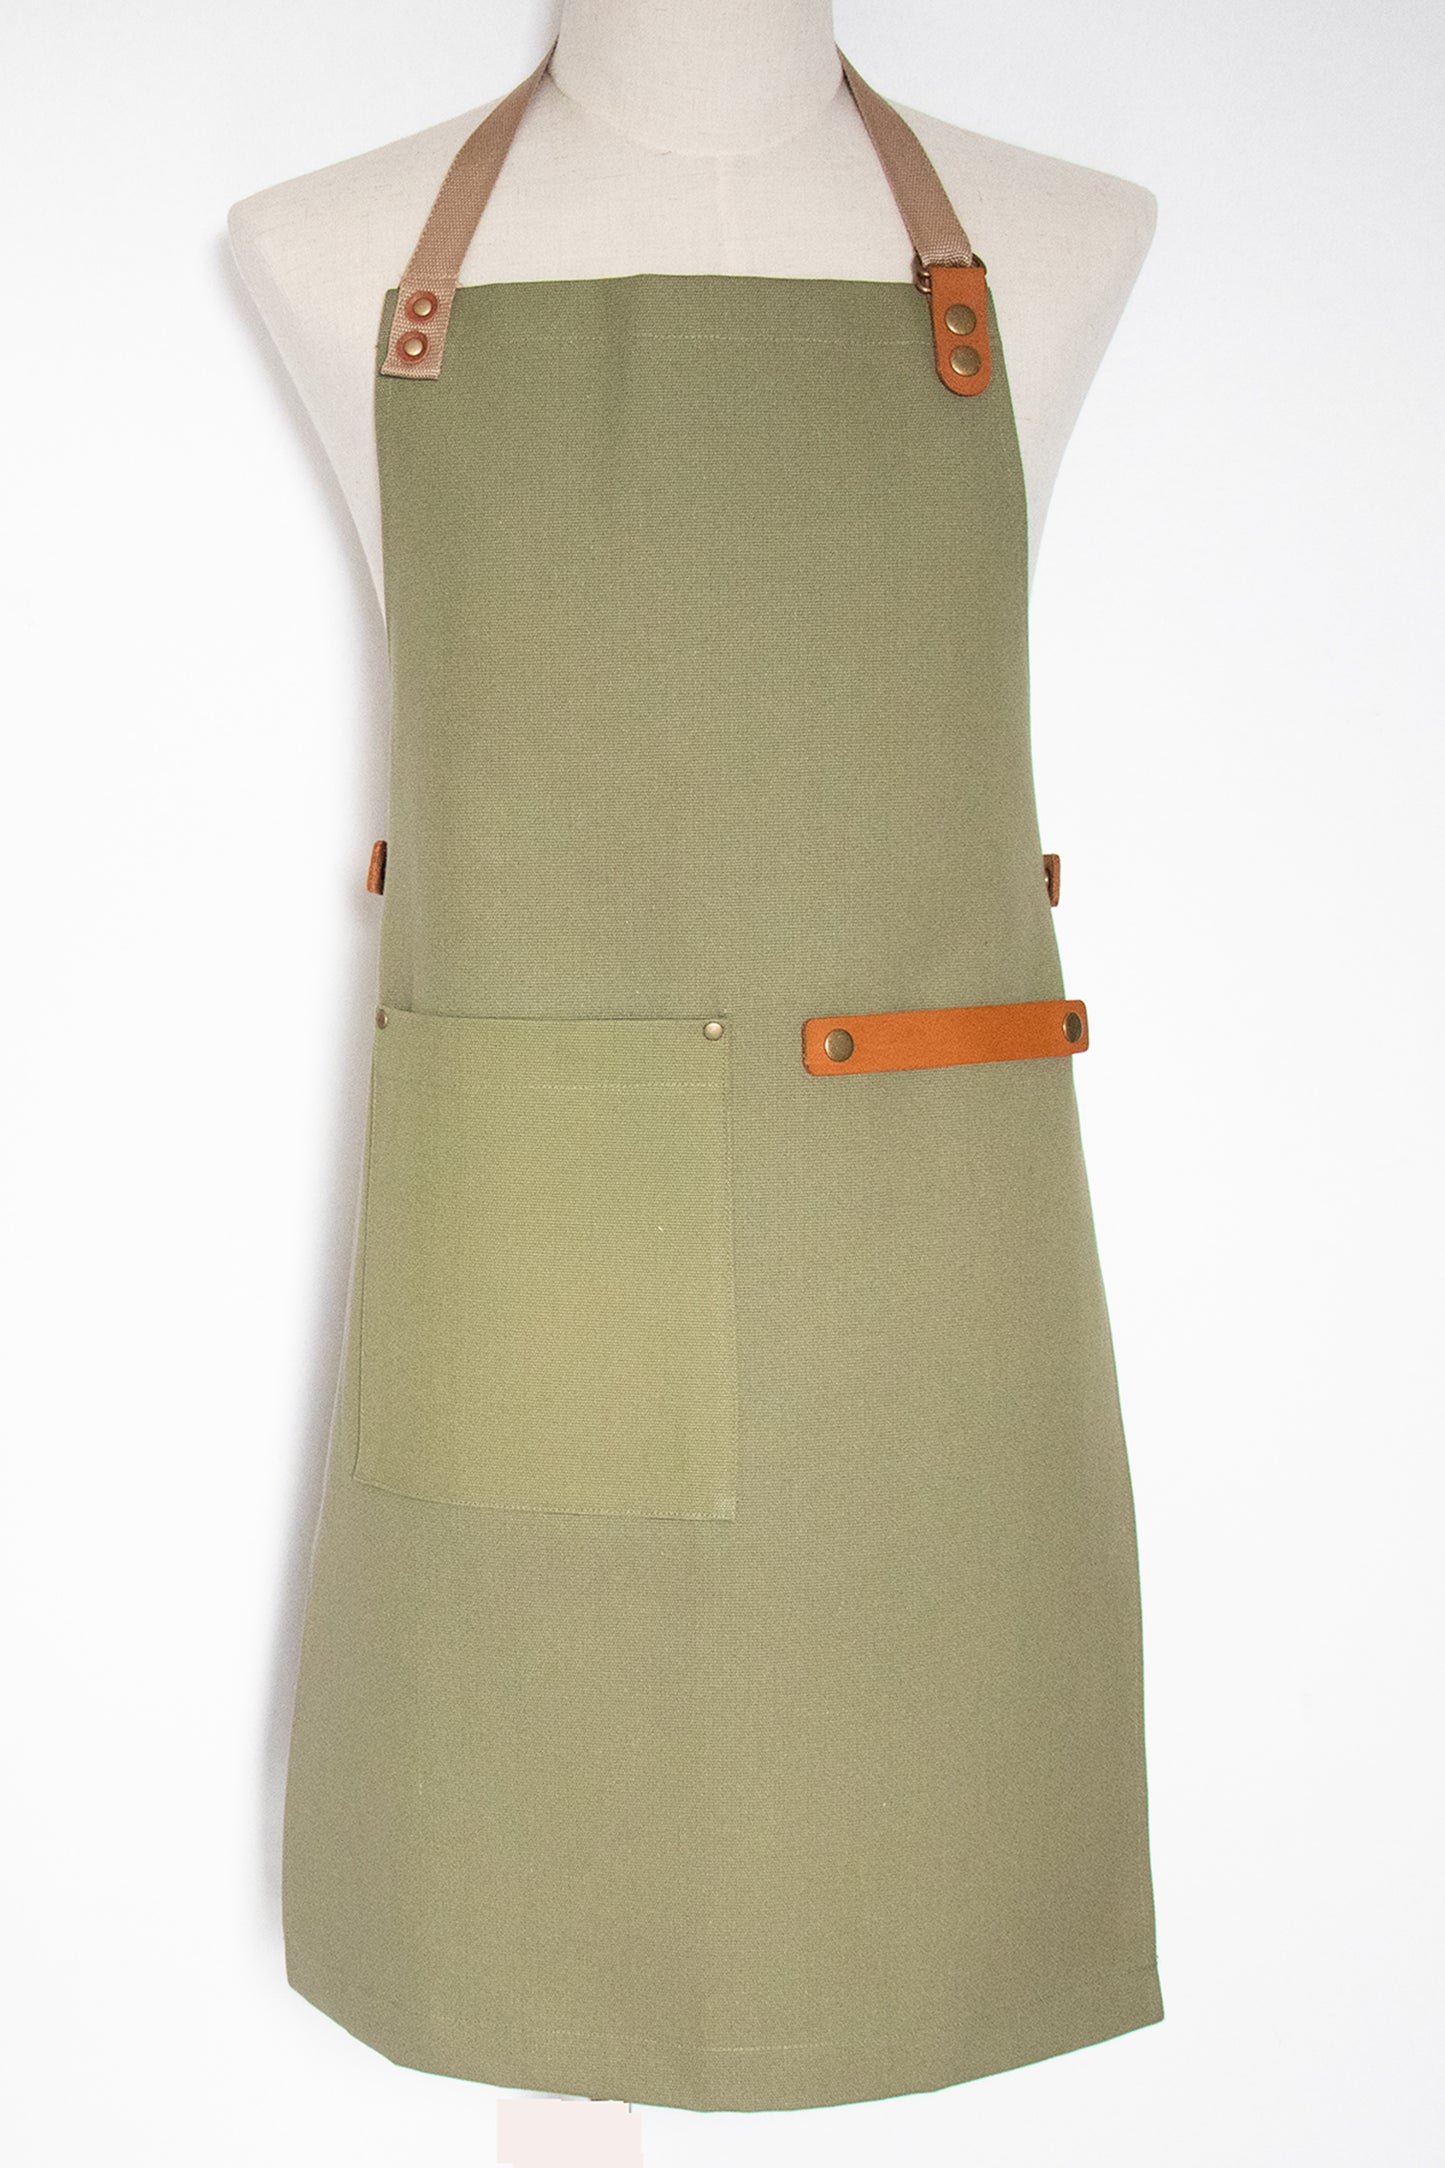 Canvas and Leather Apron - Olive Green